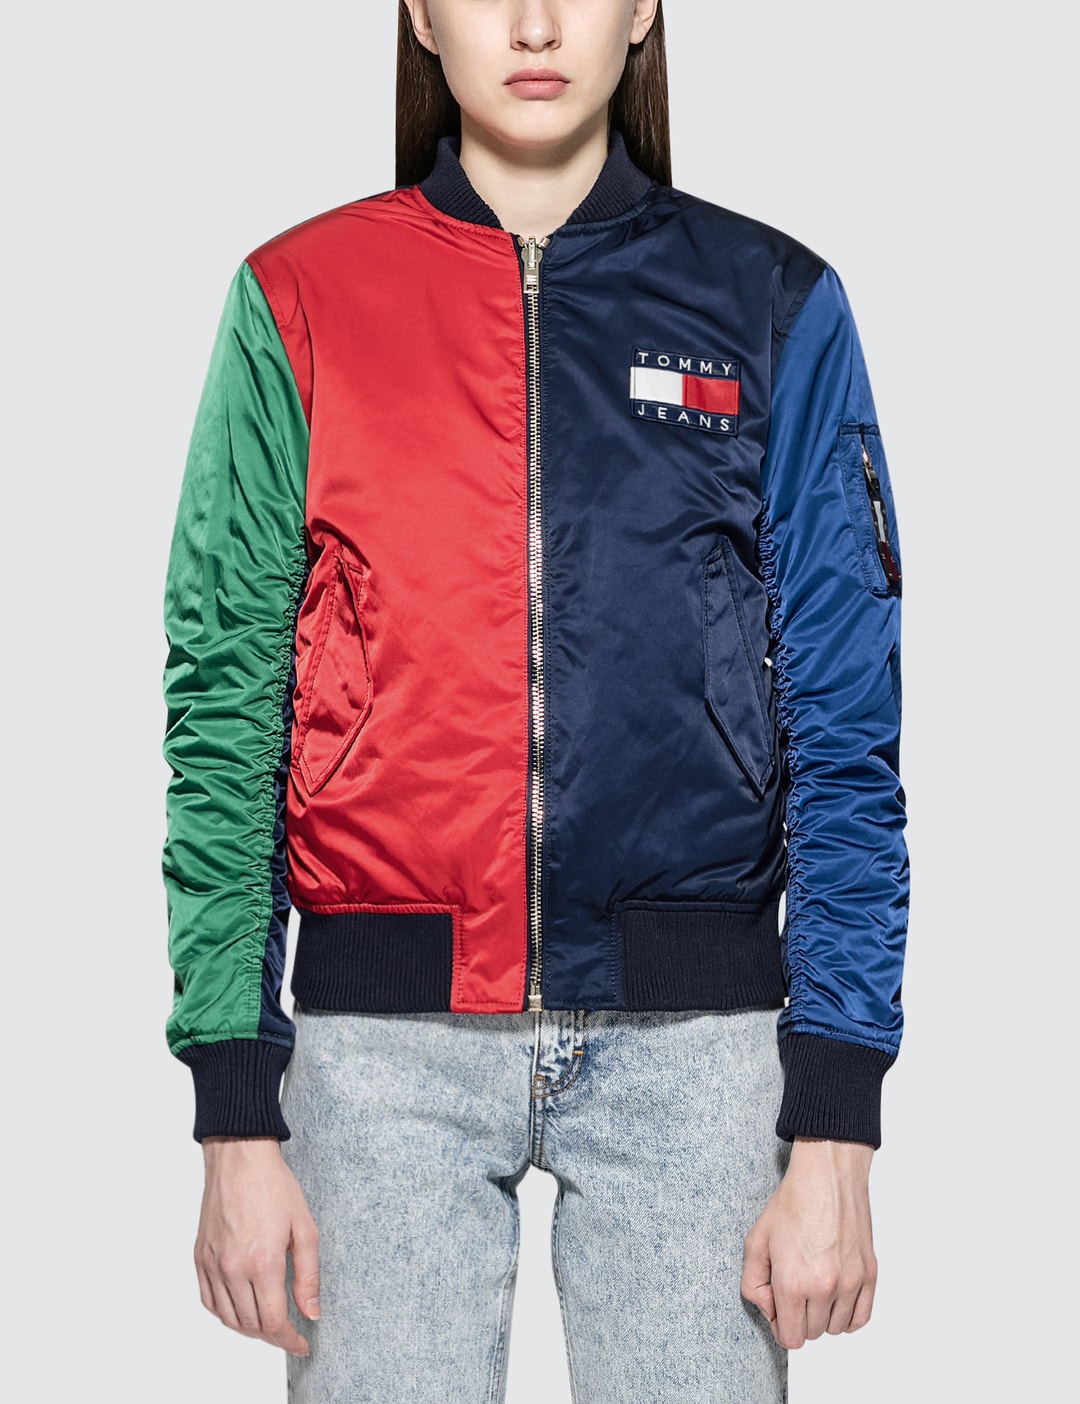 Tommy Jeans - Reversible Flag Jacket HBX - Curated Fashion and by Hypebeast